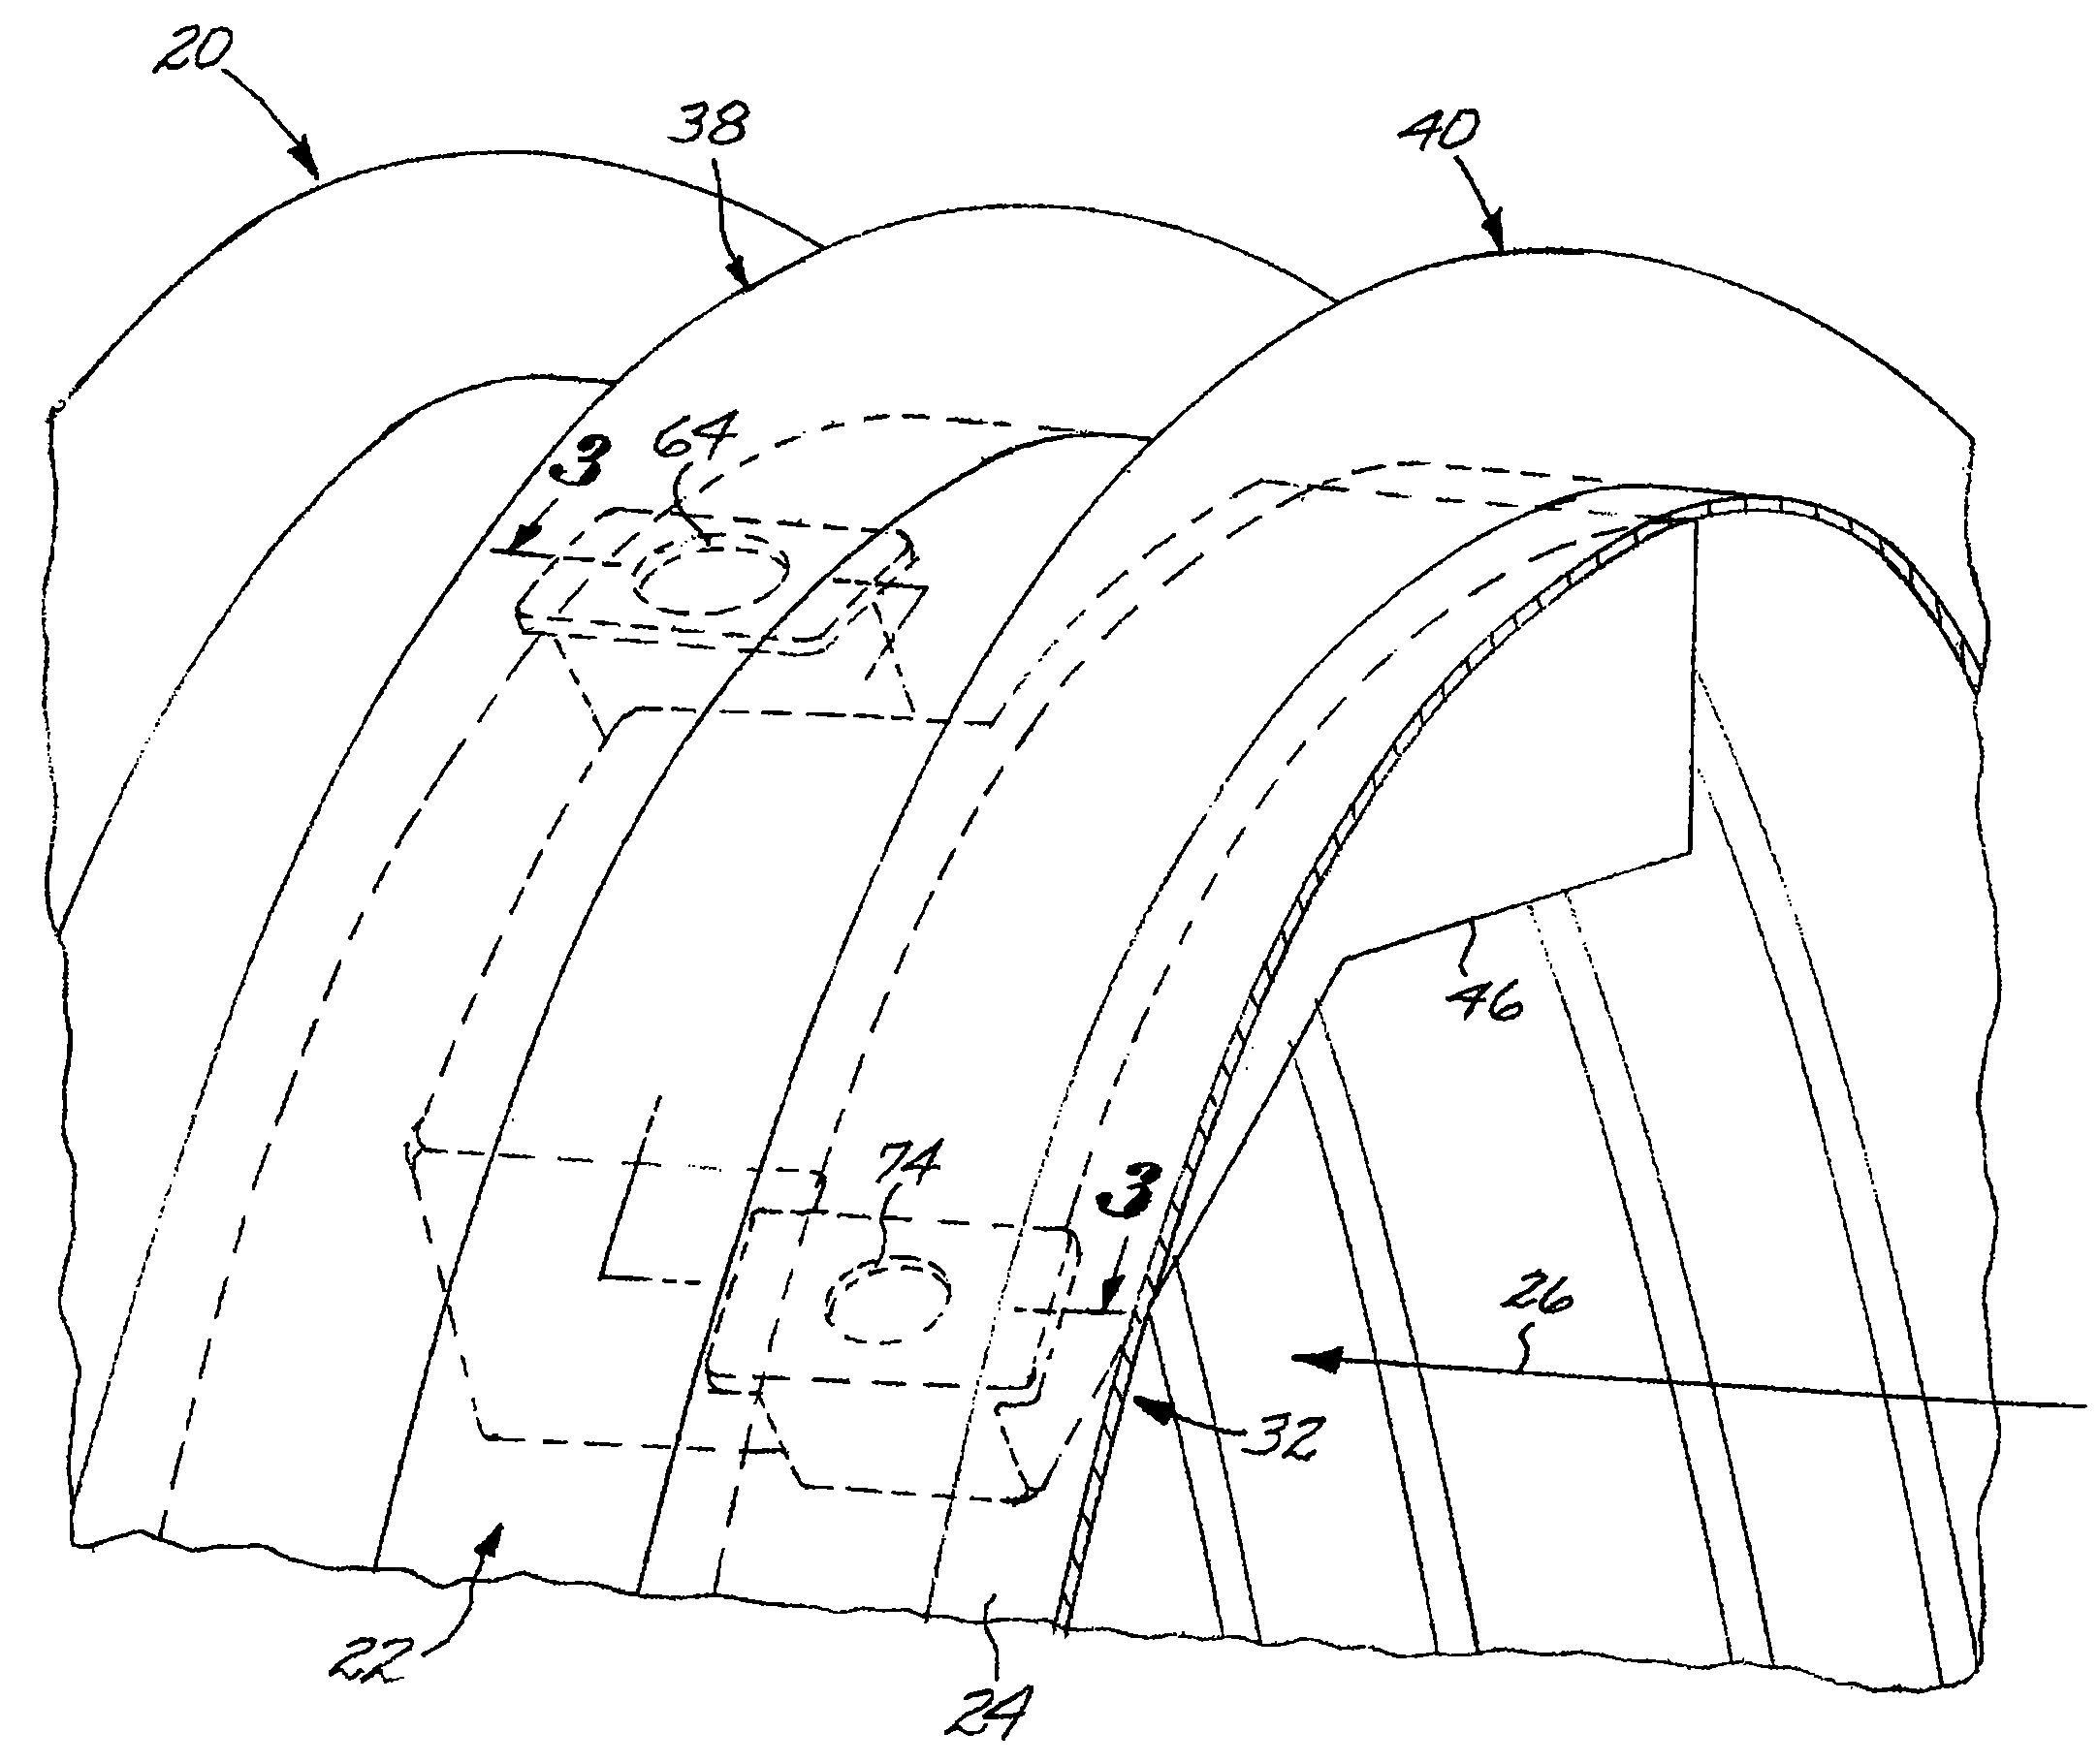 Heat exchanger system having manifolds structurally integrated with a duct